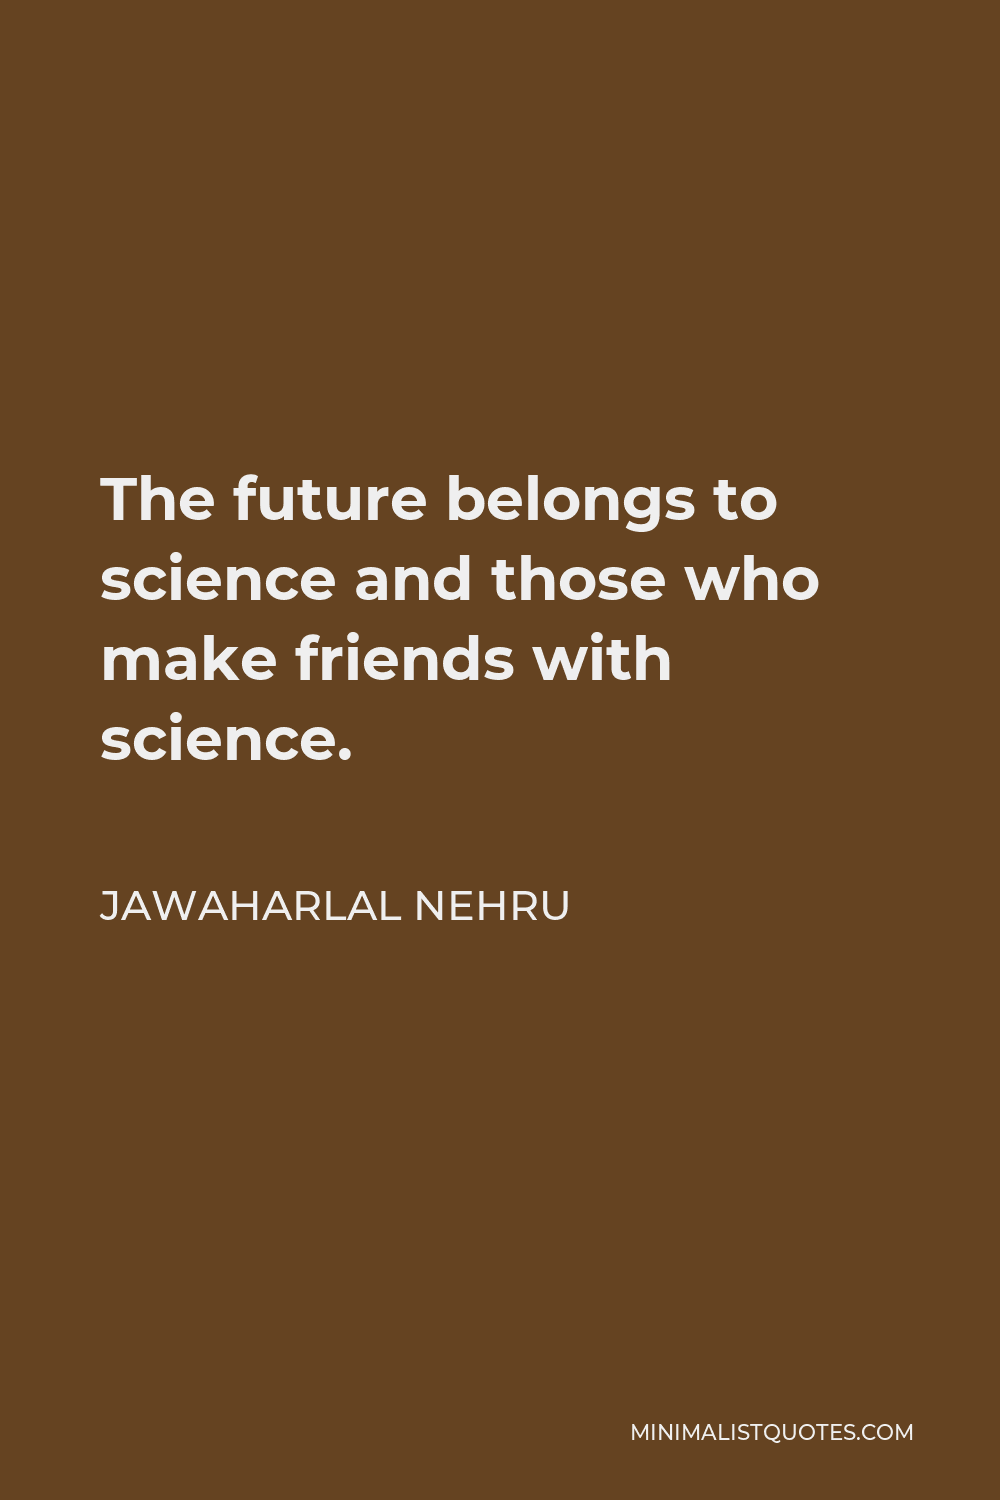 Jawaharlal Nehru Quote - The future belongs to science and those who make friends with science.